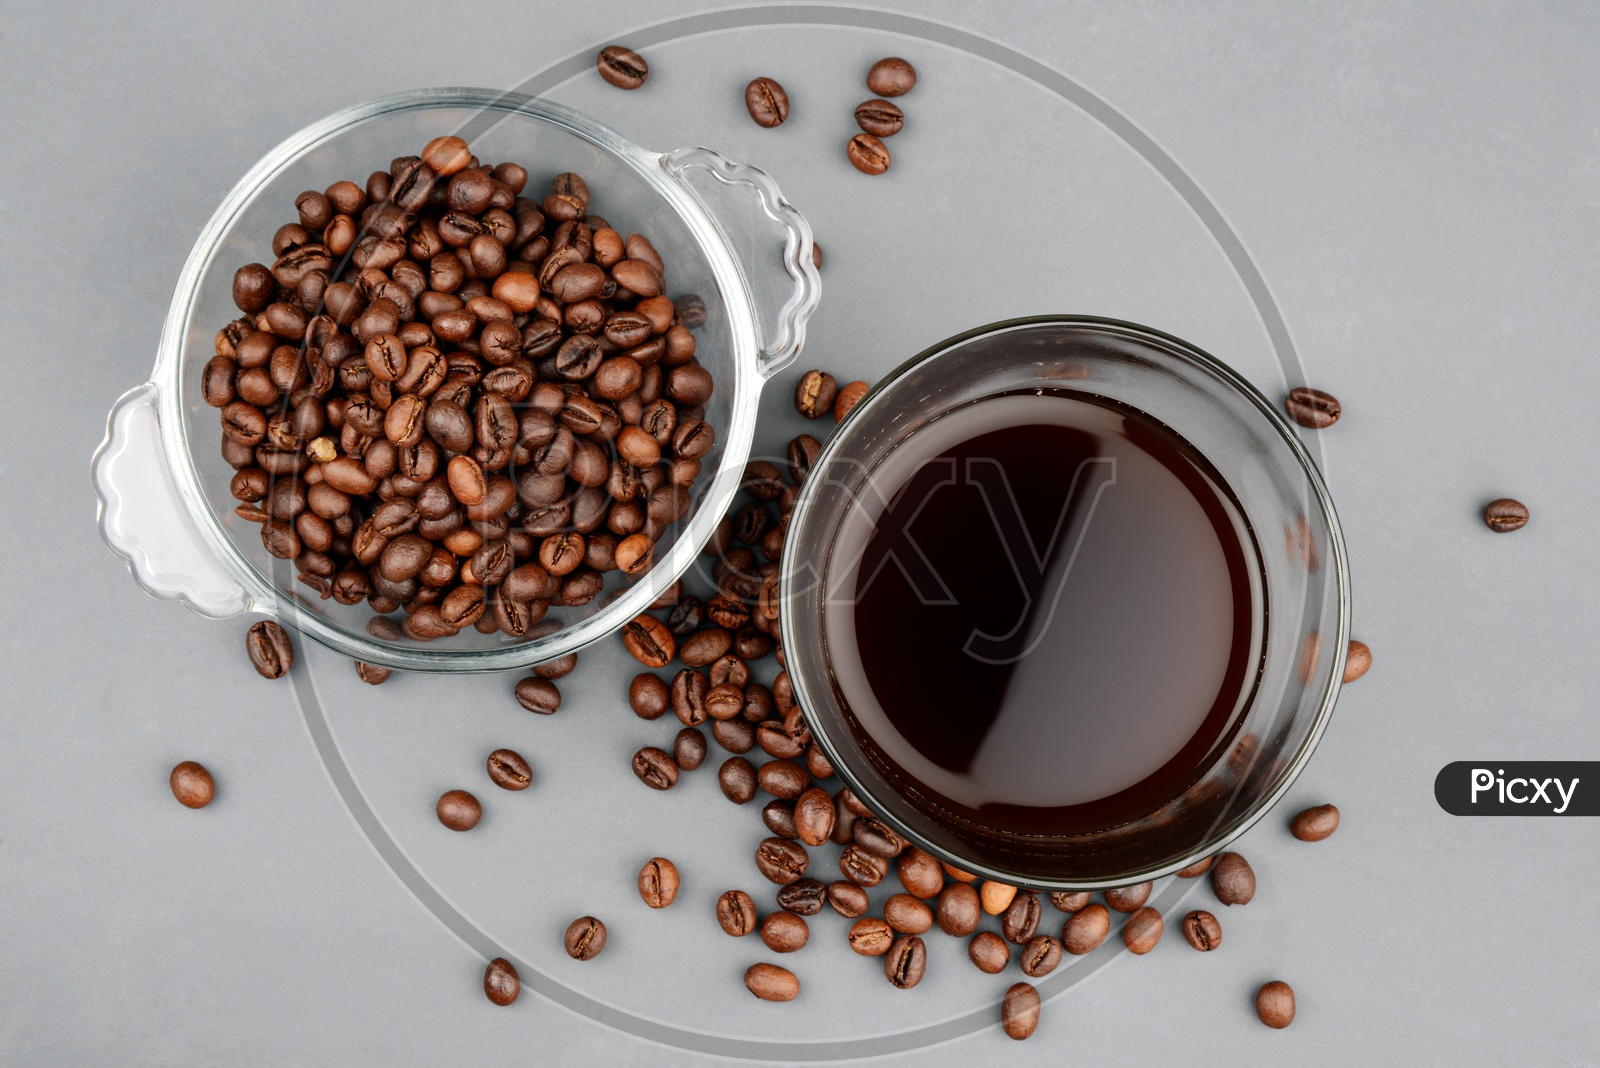 Roasted Coffee beans in a bowl with a glass of black coffee